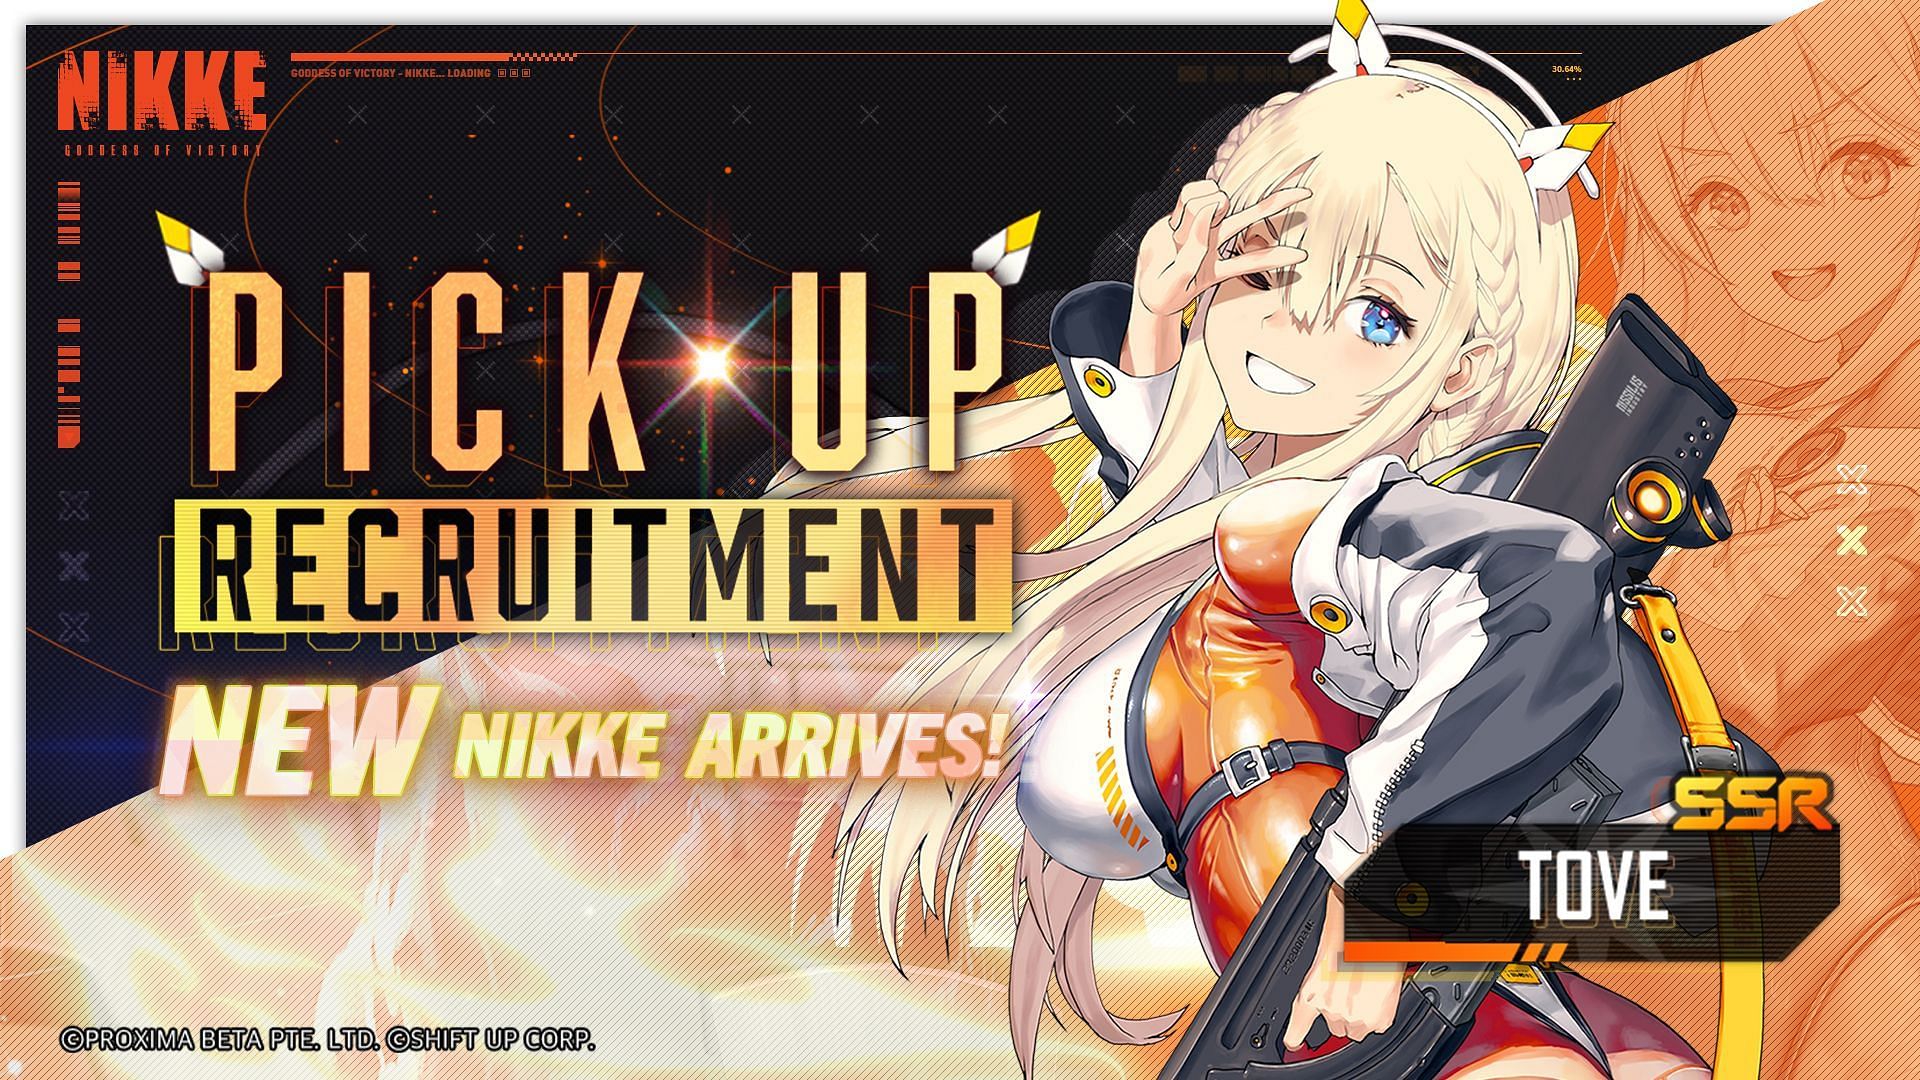 New character, event and story awaits after the maintenence break in Goddess of Victory: Nikke (Image via ShiftUp)